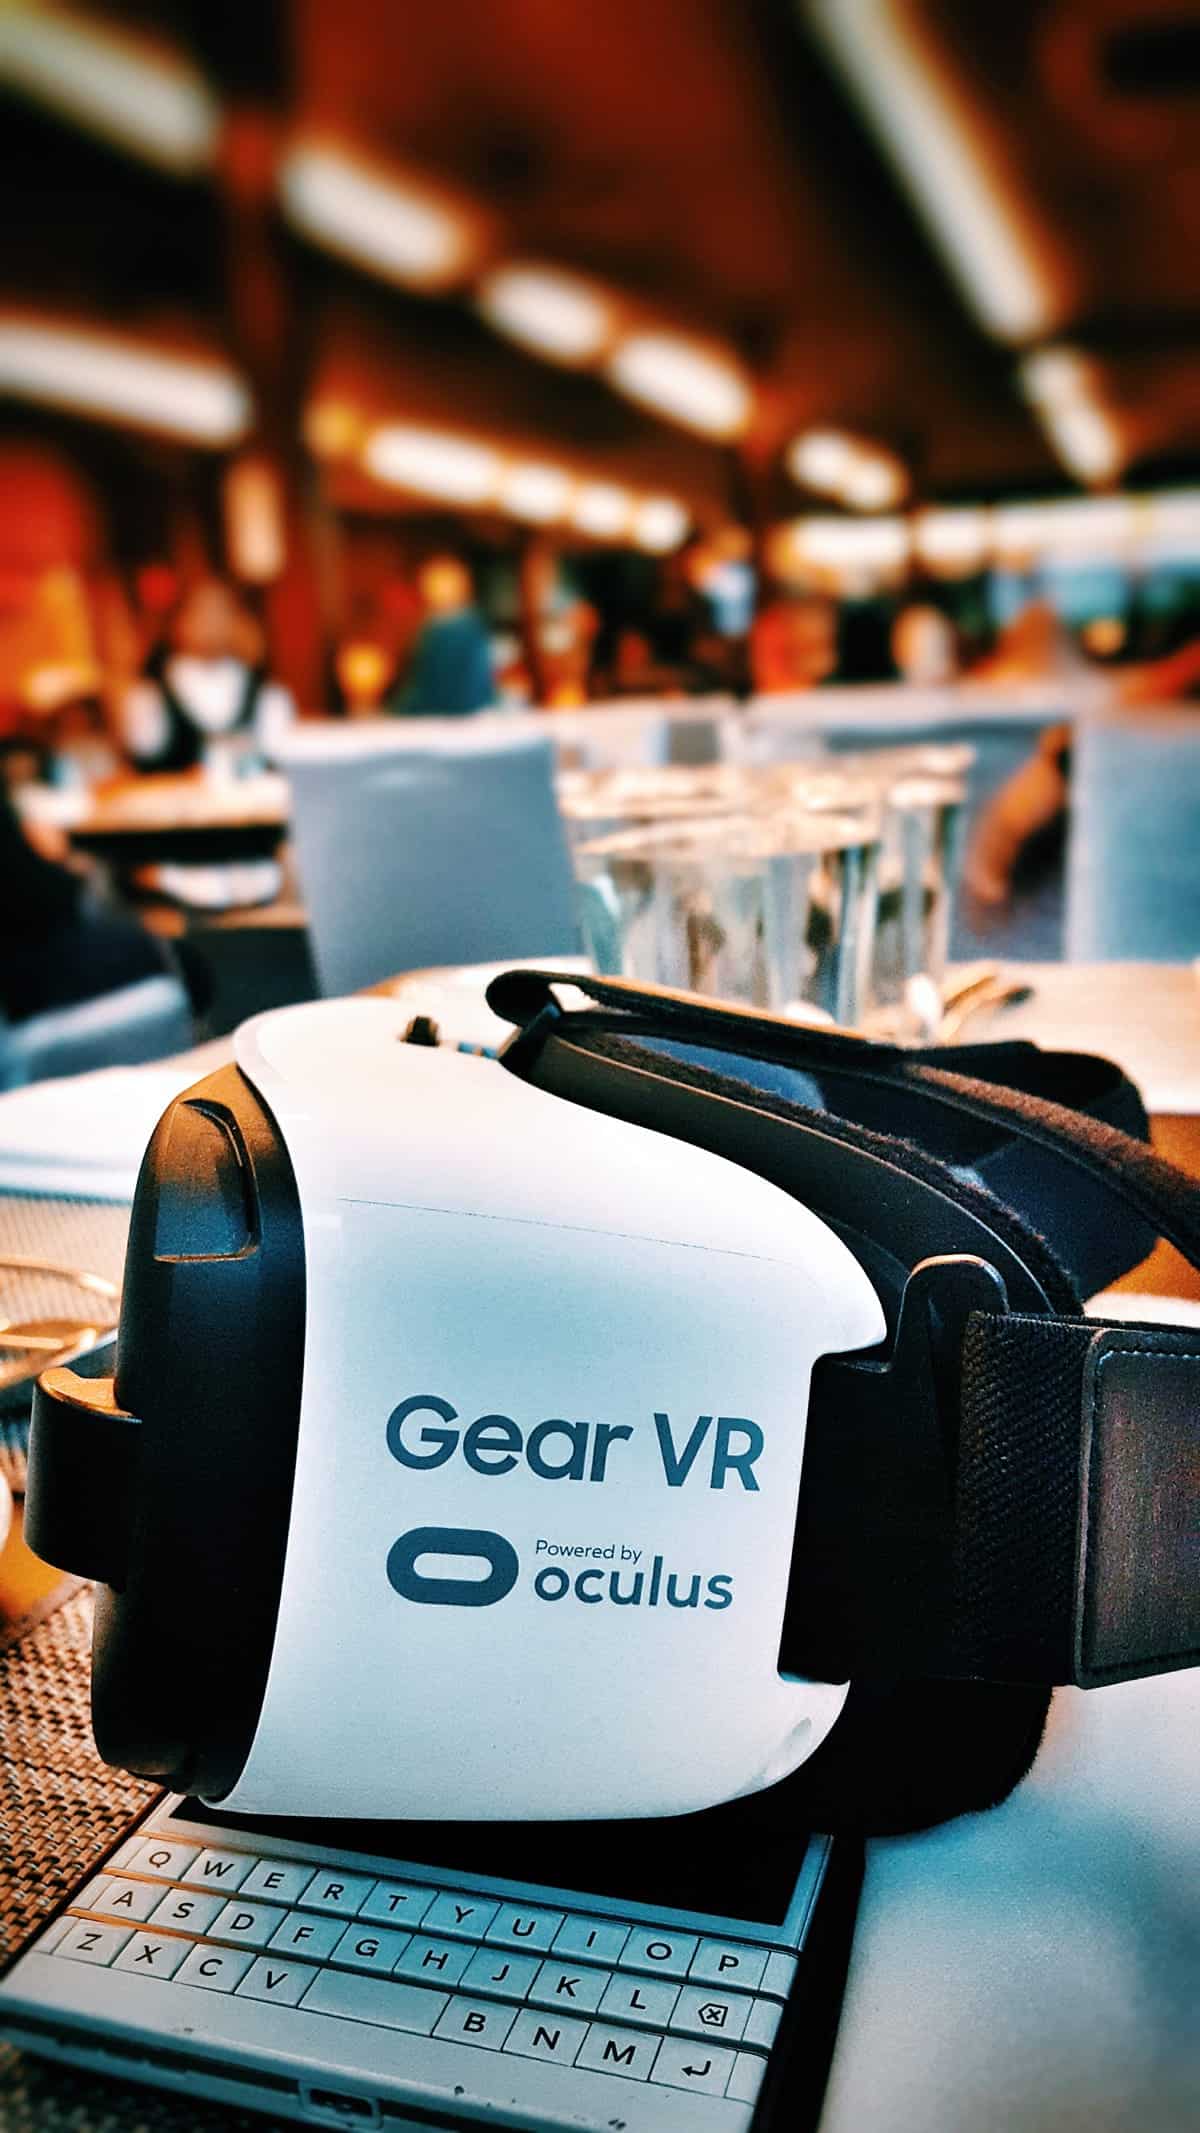 A photo of an Oculus VR headset sitting on a table.